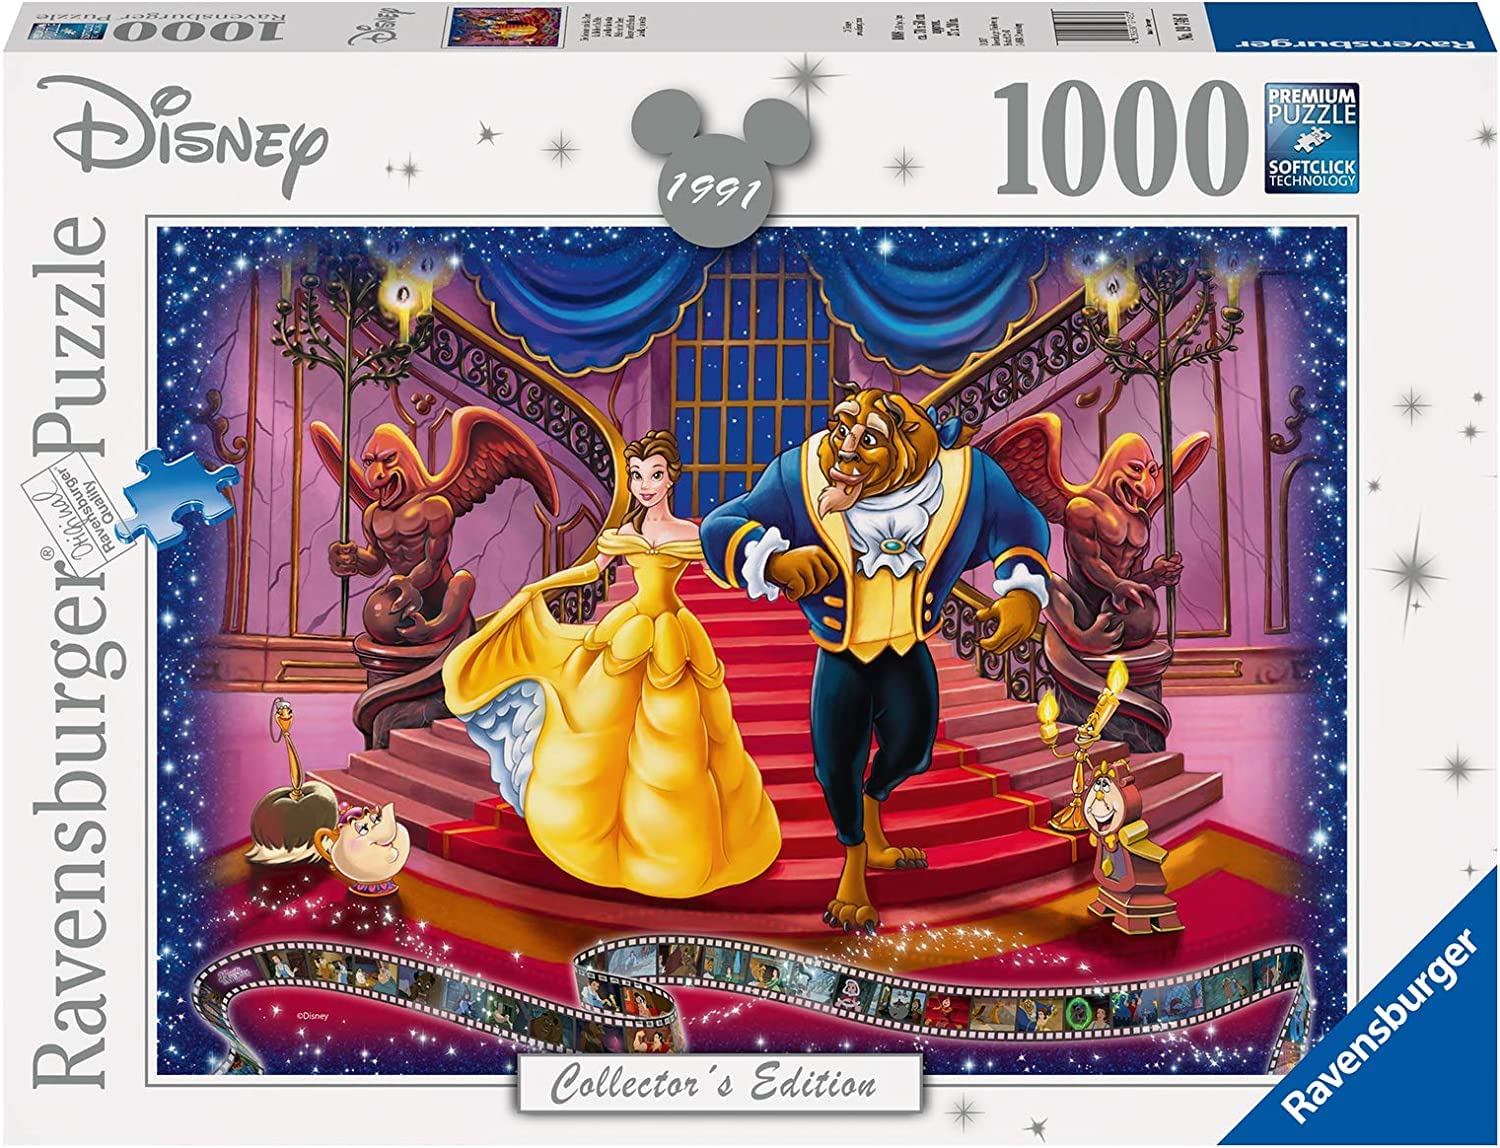 Ravensburger Disney Beauty and The Beast 1000 Piece Jigsaw Puzzle for Adults - 19746 - Every Piece is Unique, Softclick Technology Means Pieces Fit Together Perfectly